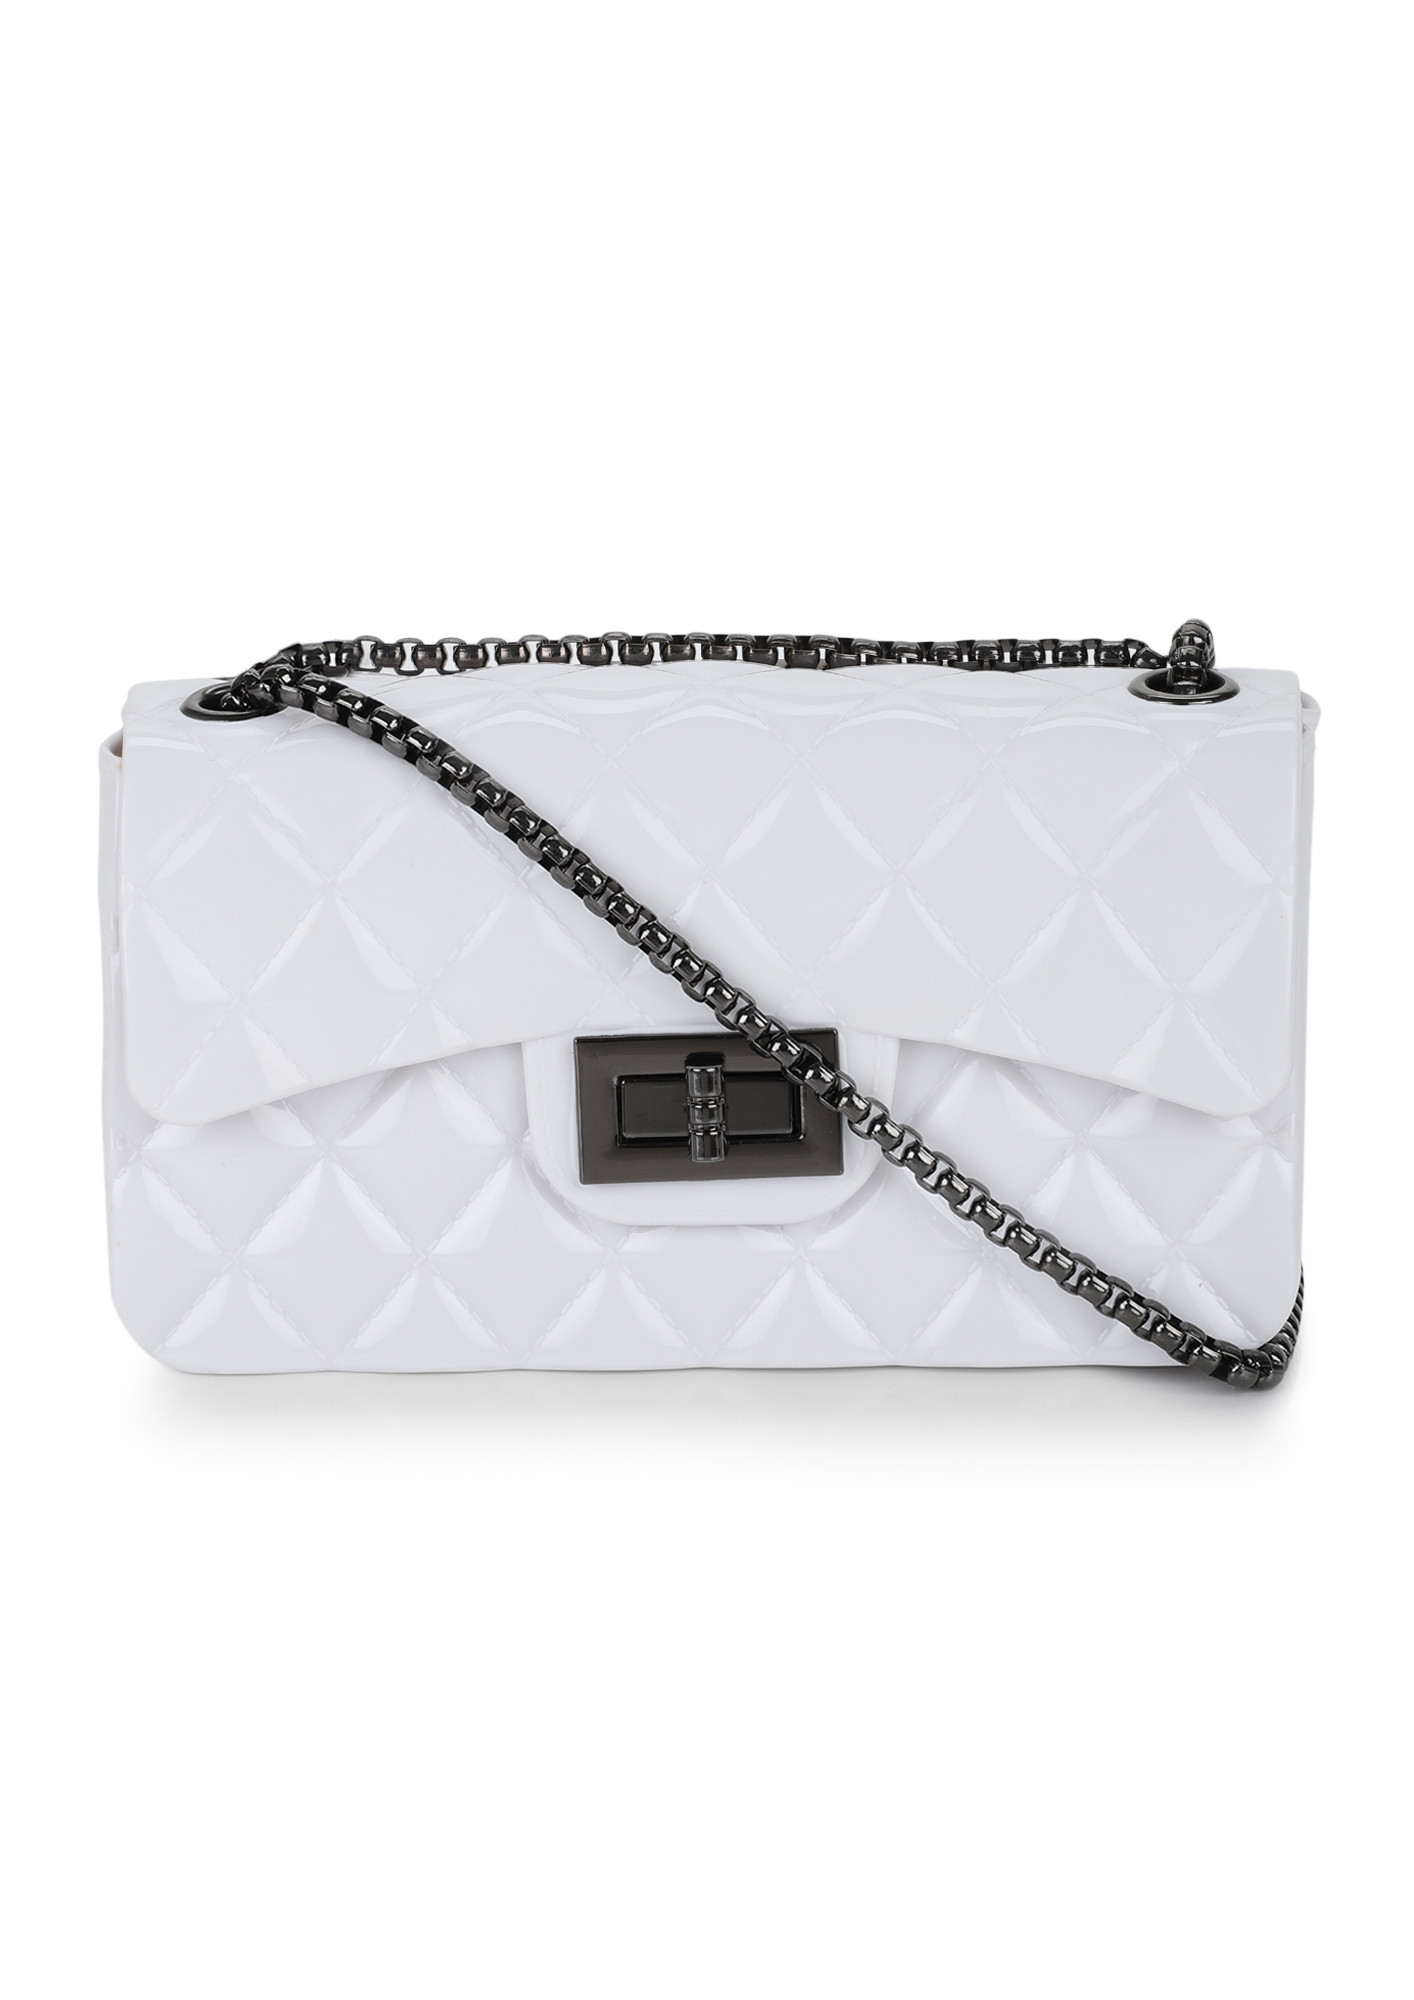 PARTY ON MY MIND WHITE SLING BAG